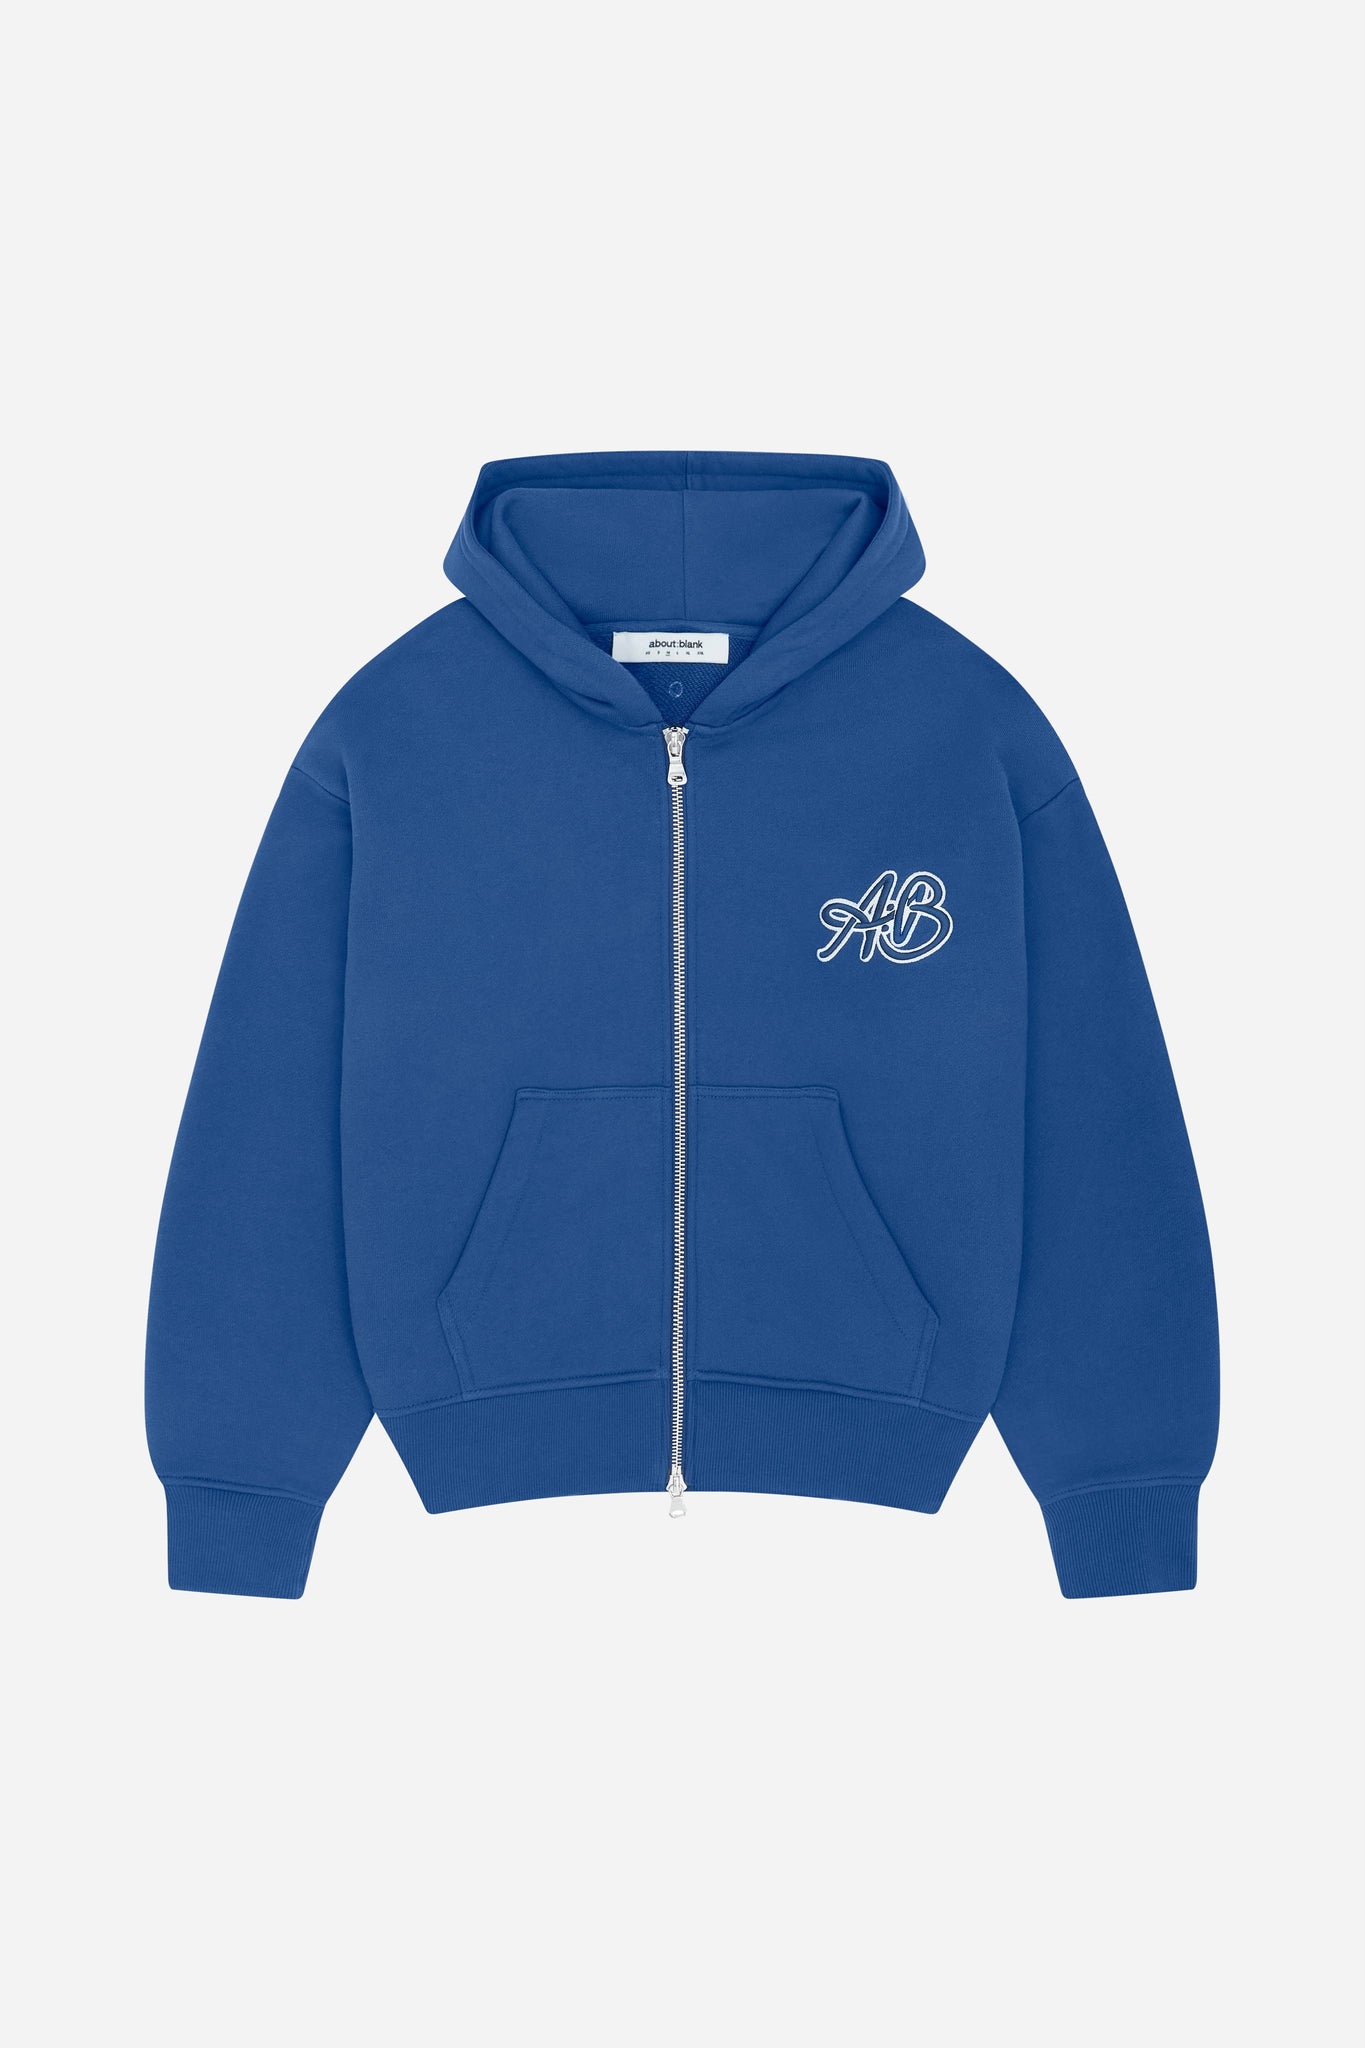 initial double zip hoodie estate blue/white